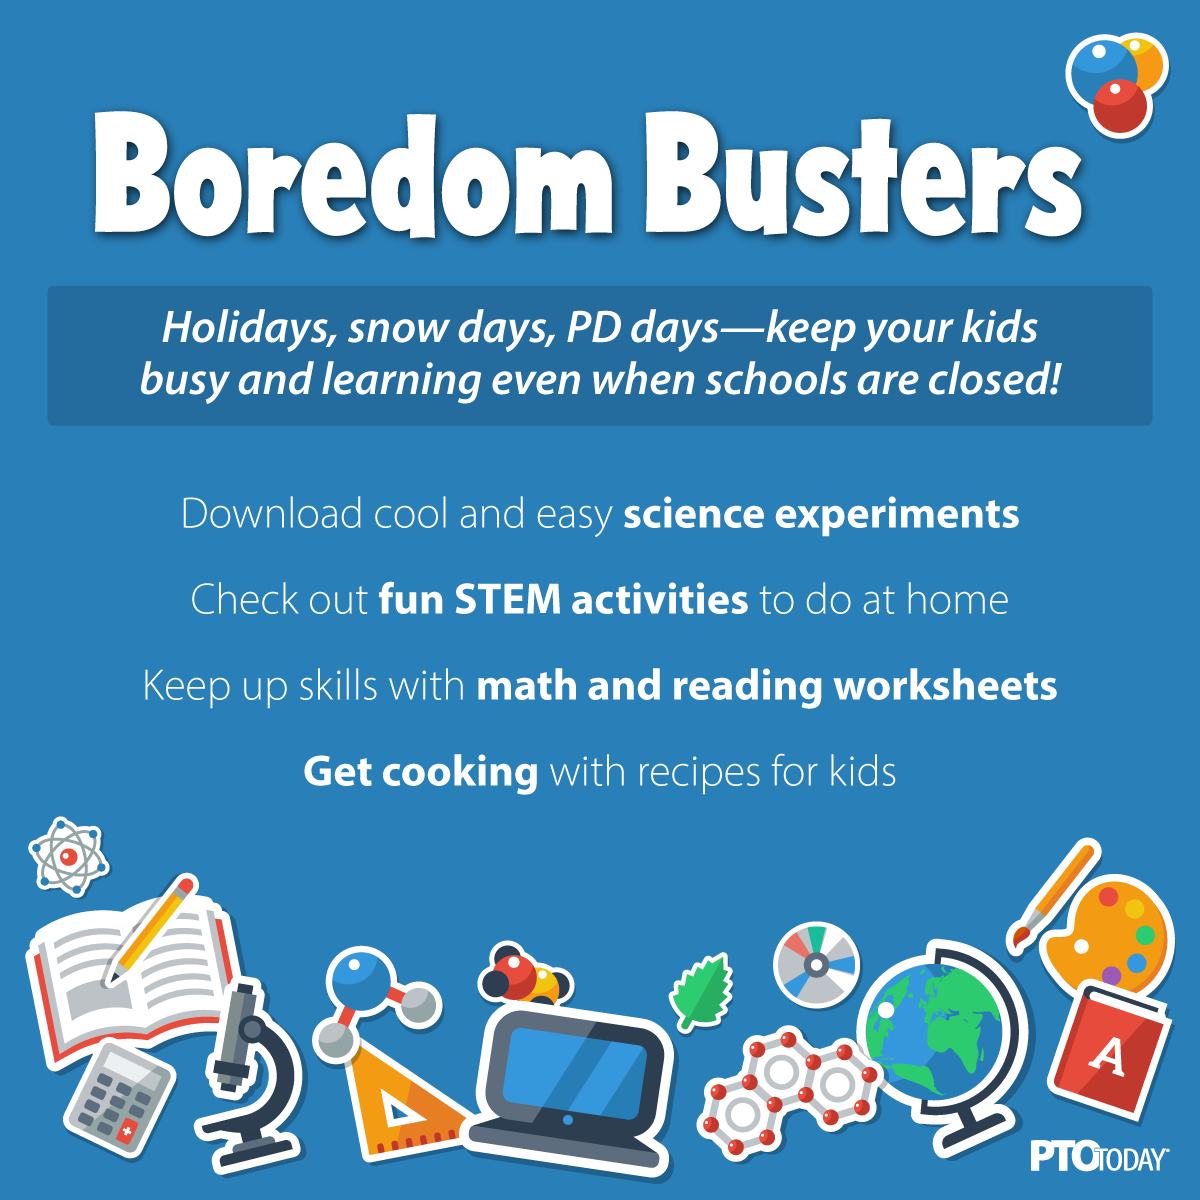 Resources To Keep Kids Busy When Schools Are Closed